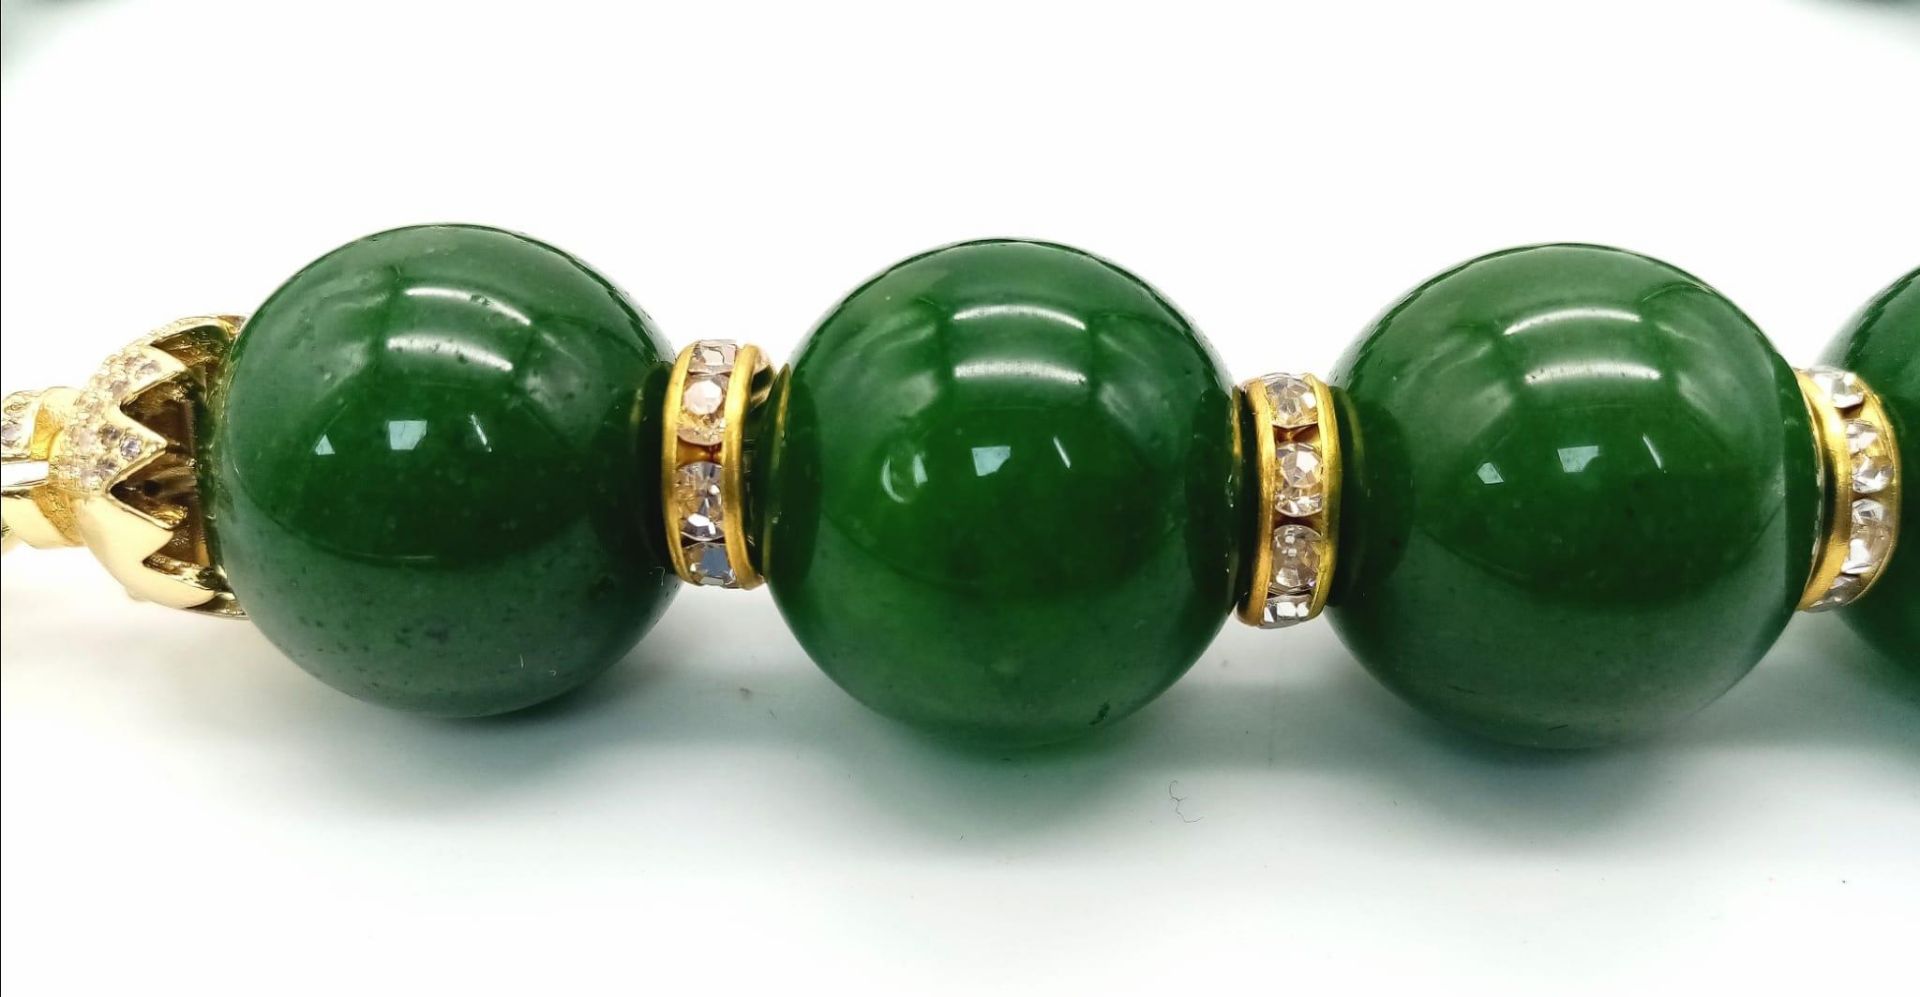 An excellent quality, large beaded (20 mm diameter), spinach green jade necklace and earrings set - Bild 4 aus 5